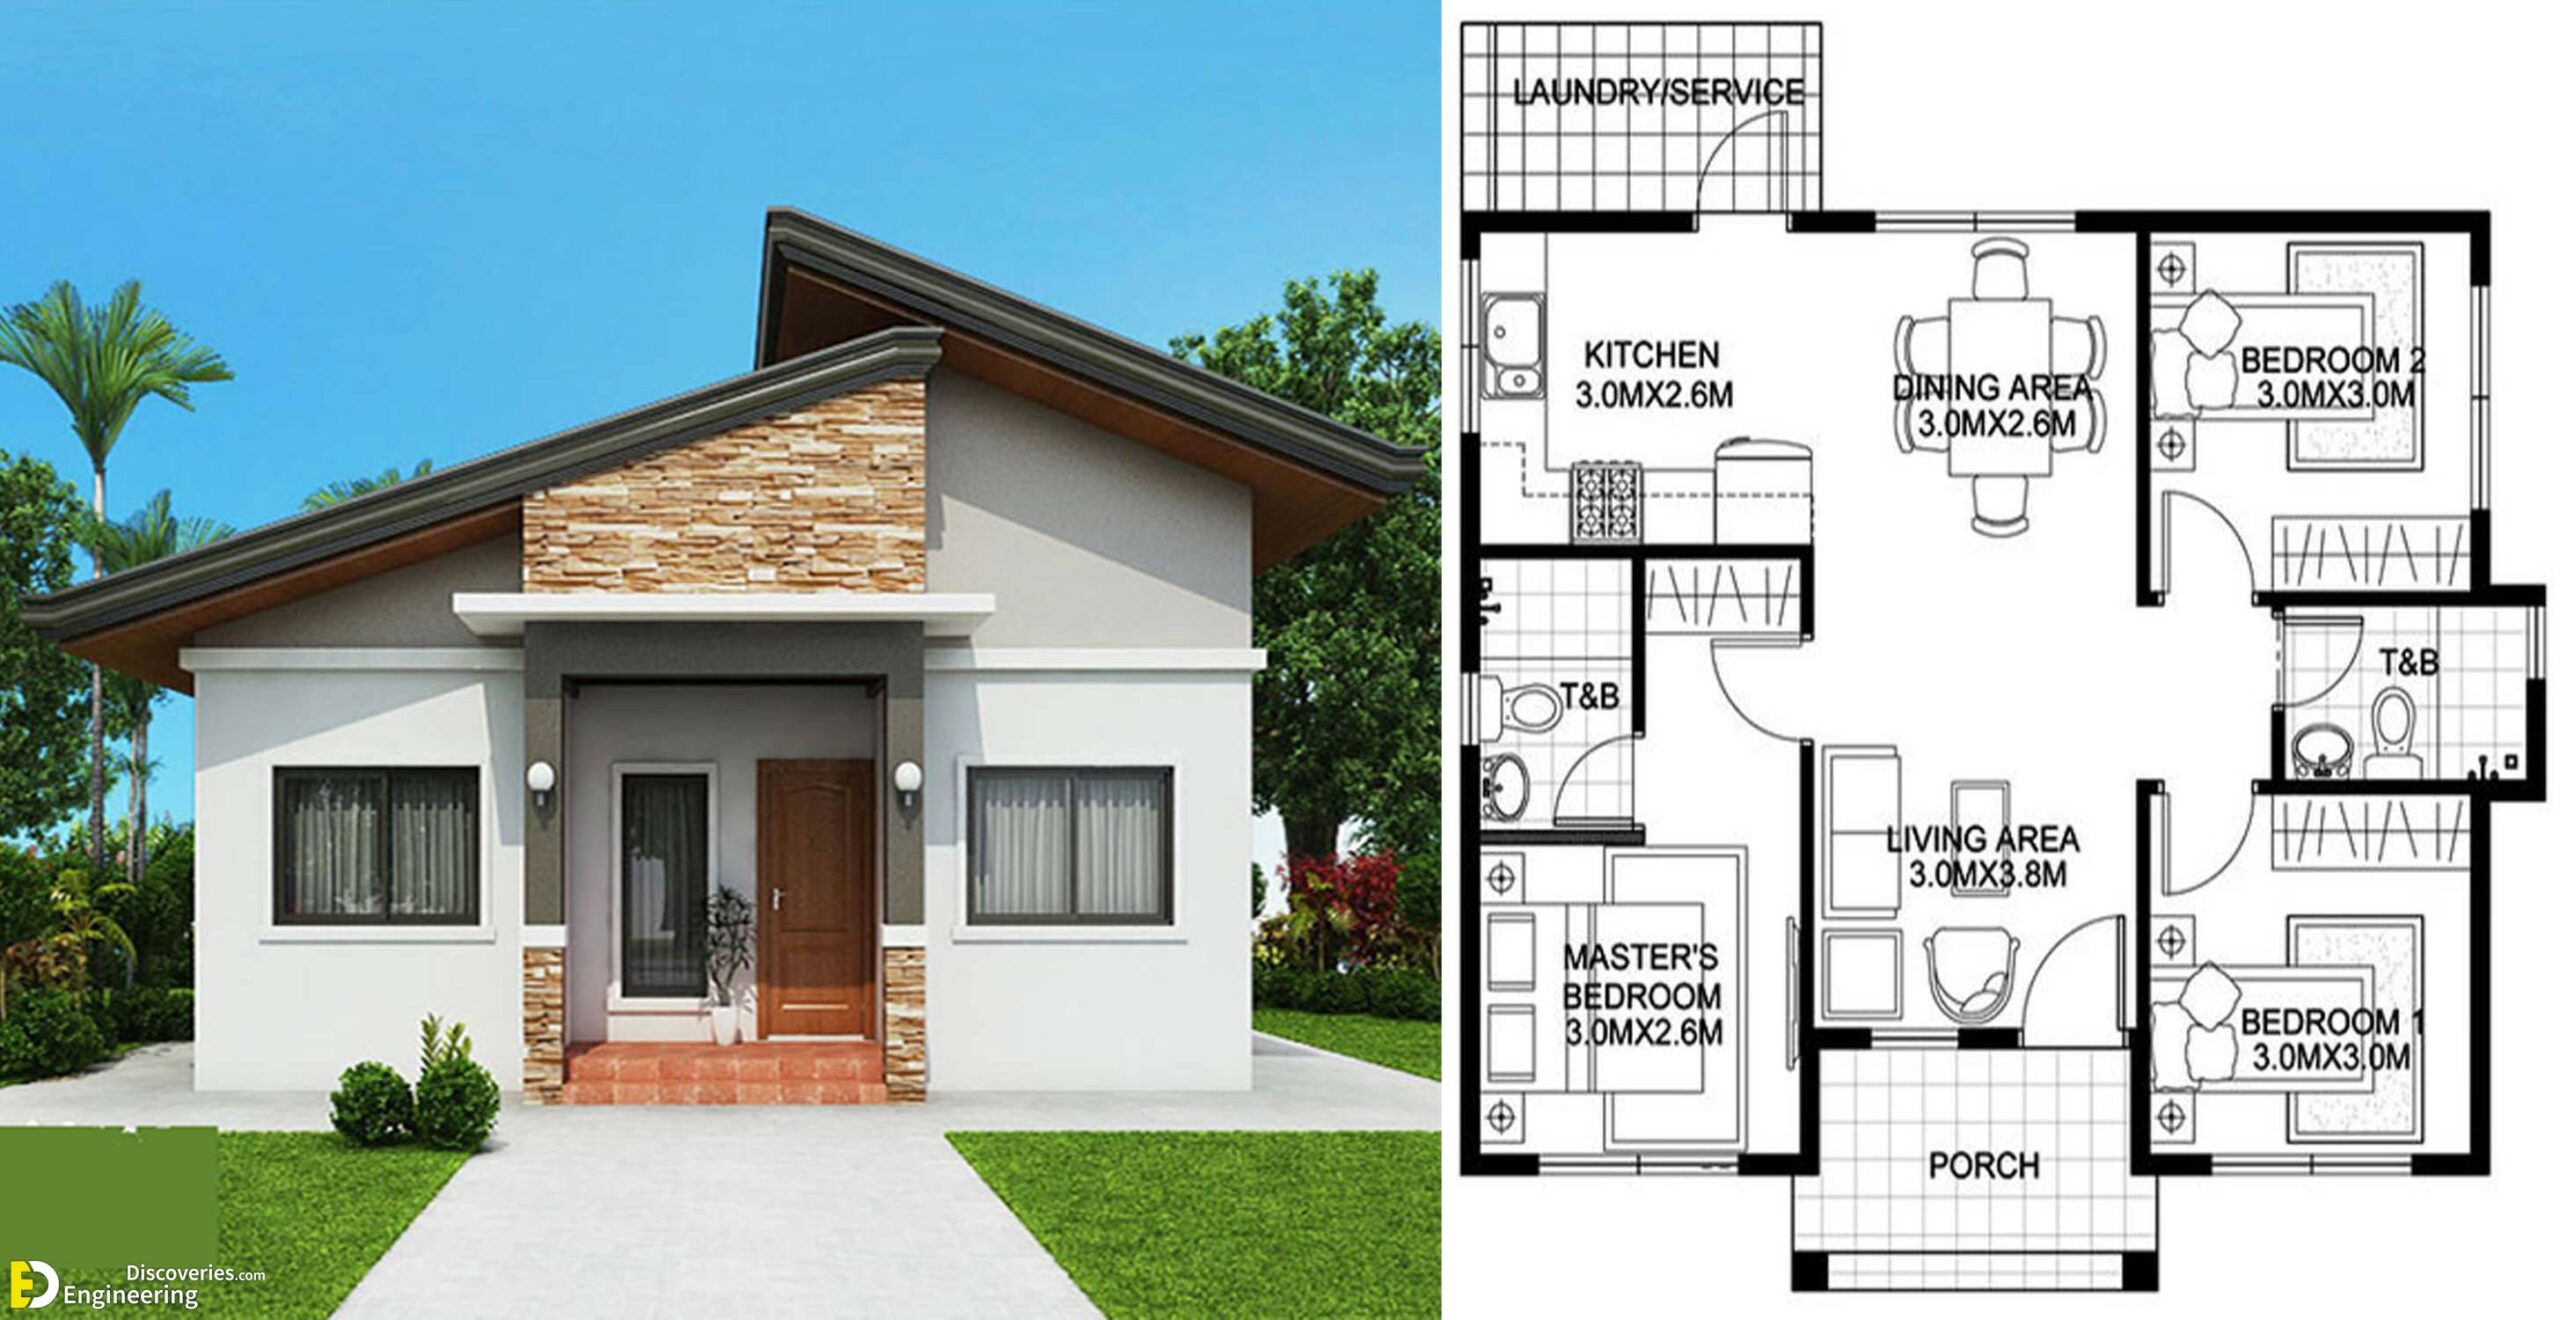 3 Bedroom Bungalow House Plan - Engineering Discoveries